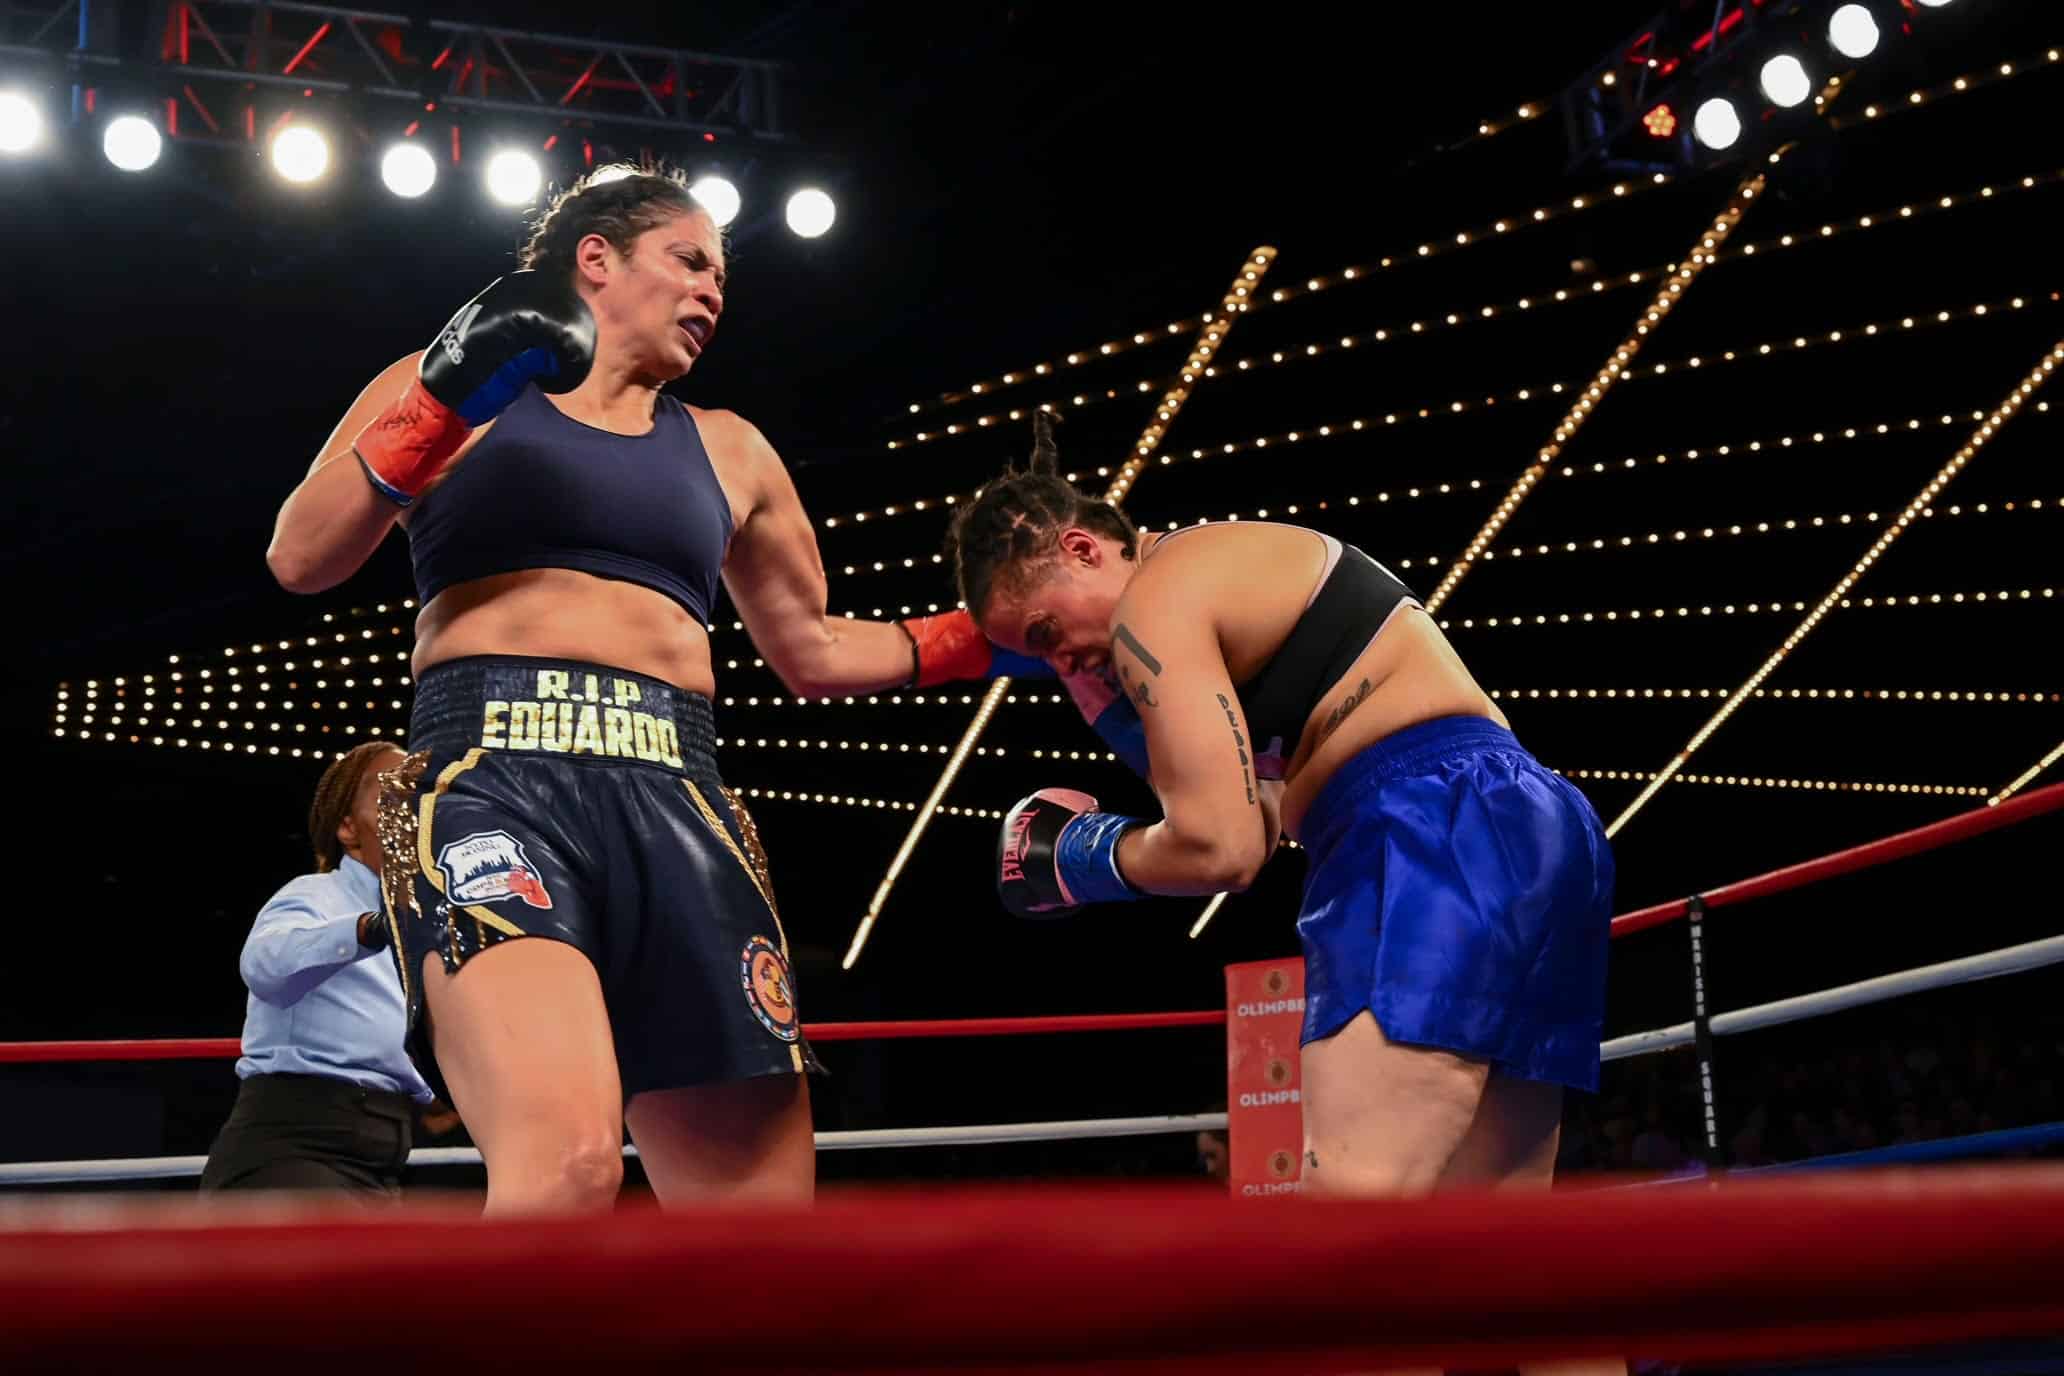 Nisa Rodriguez: Amateur Boxing Standout and NYC Community Volunteer